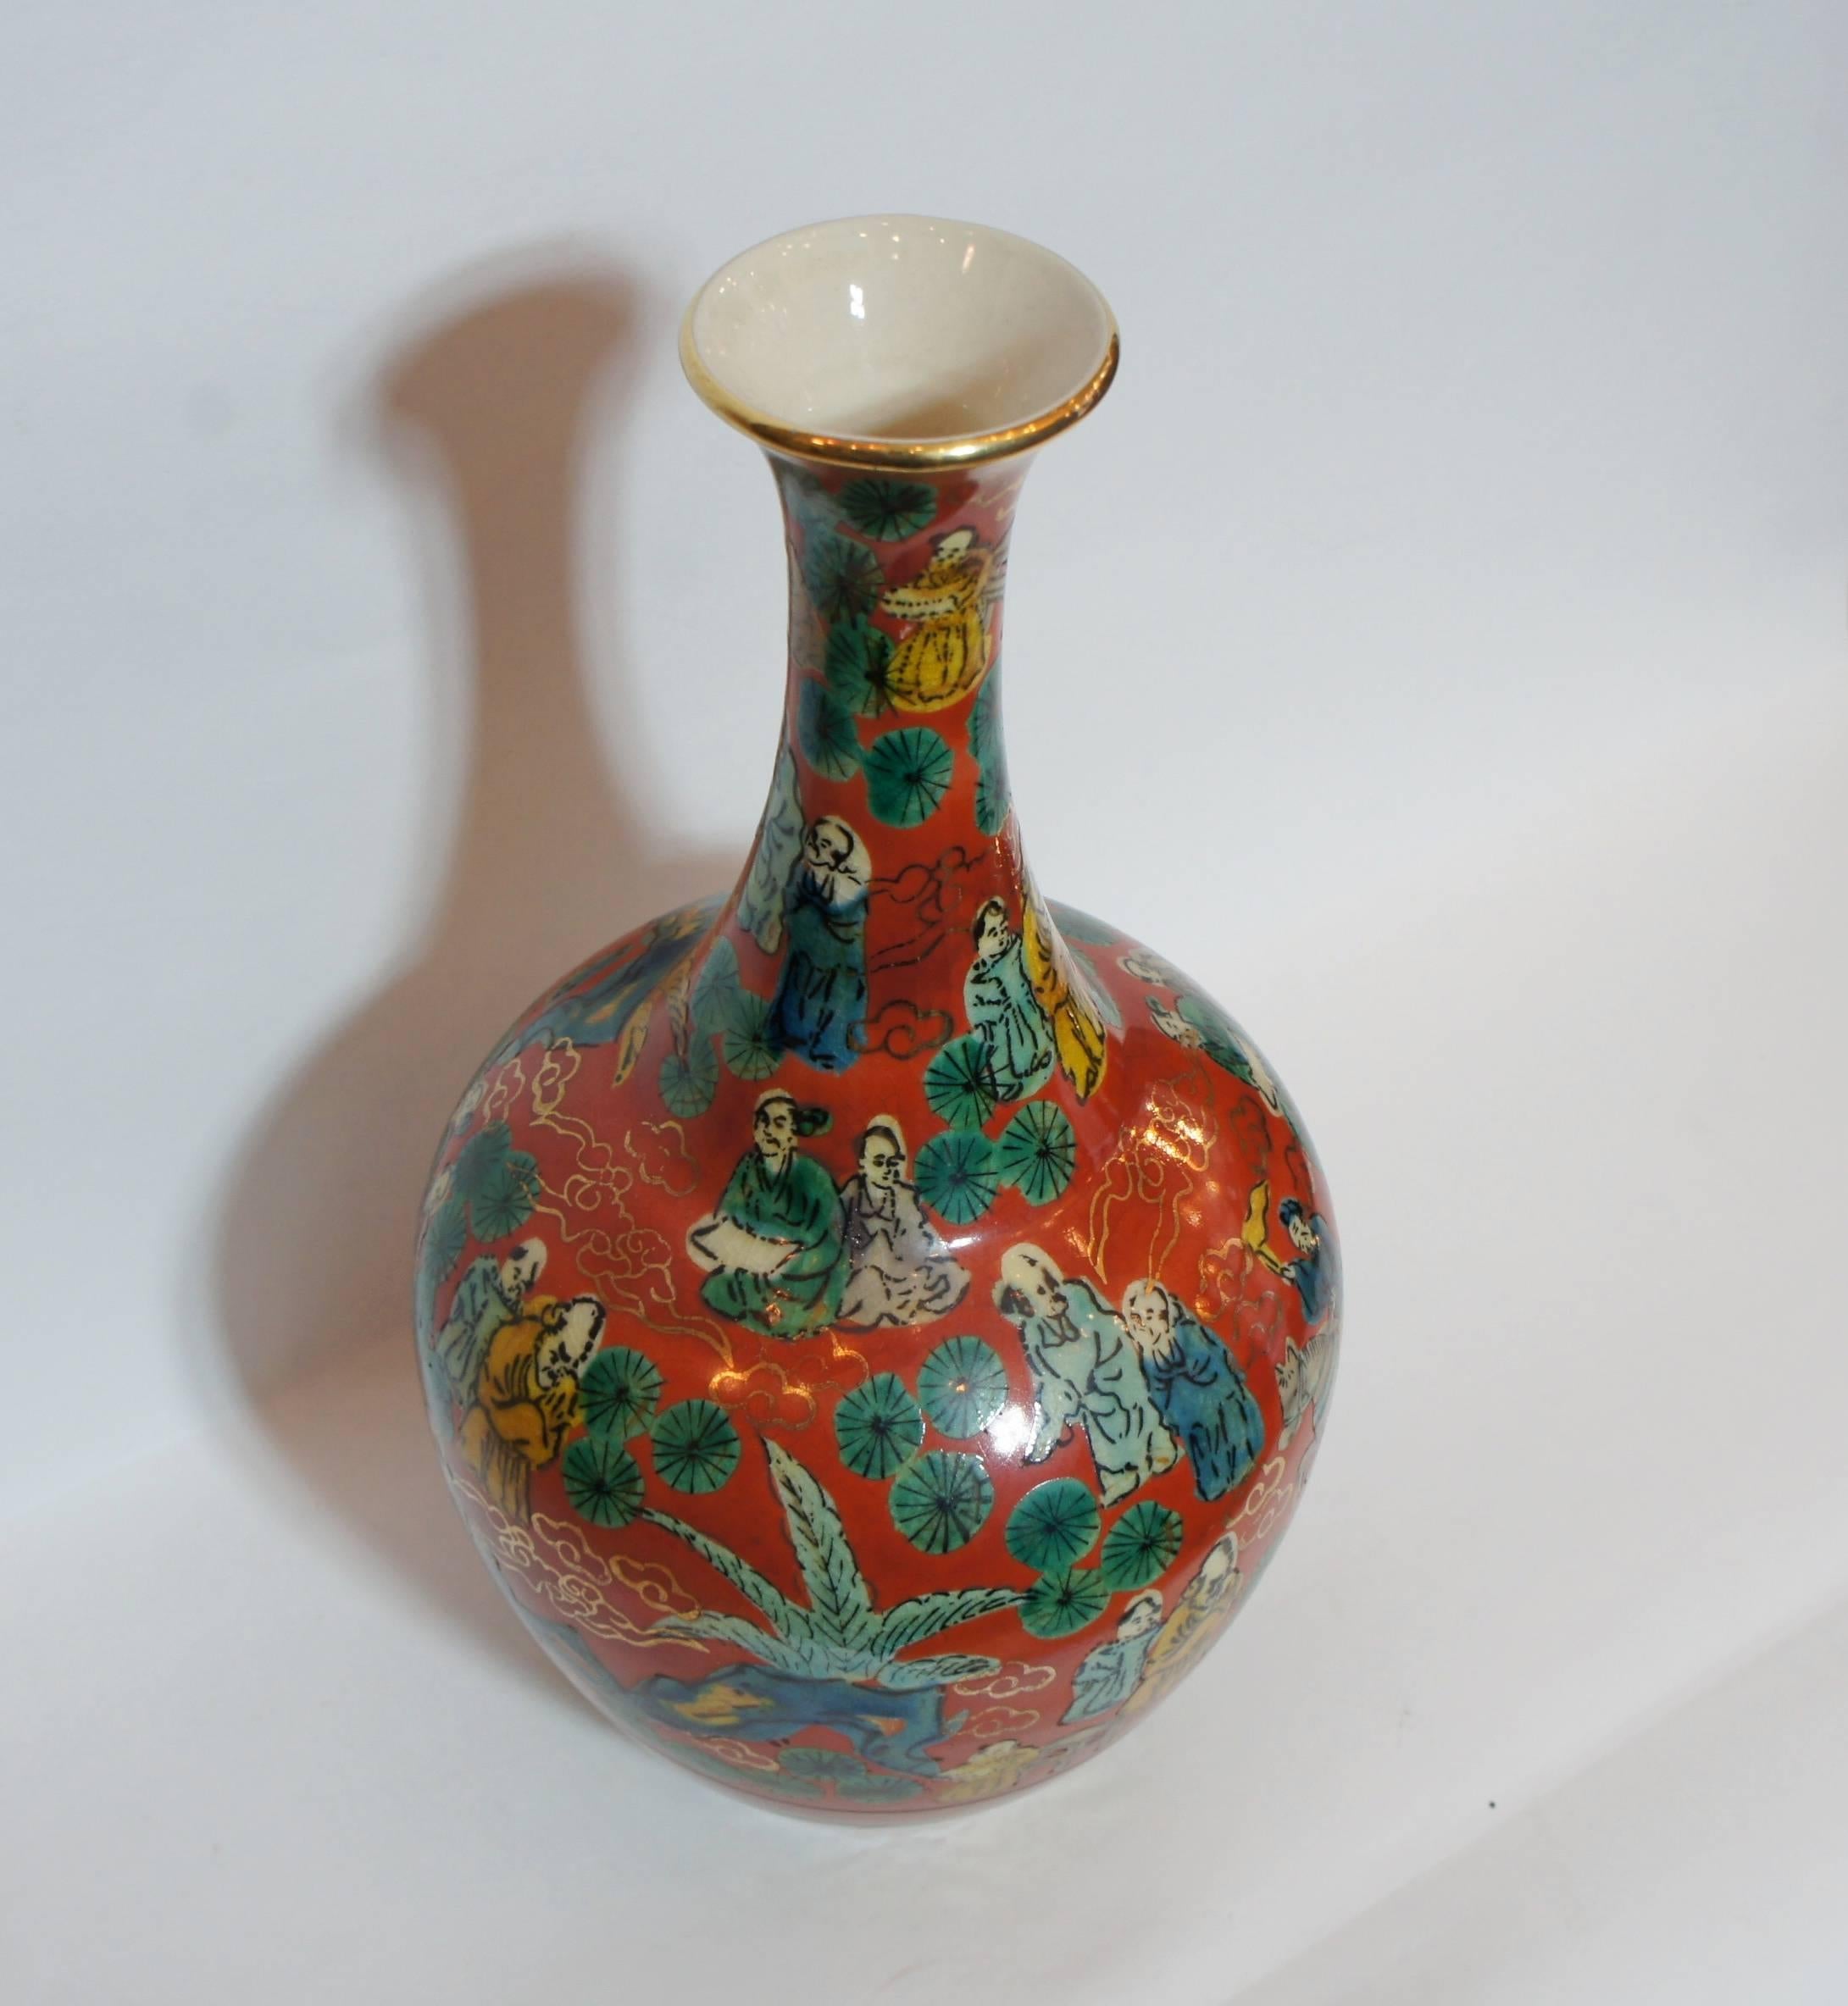 Kutani Aoki Mokubei Ware vase, Japan. The characteristic deep and bright colors and patterns of Kutani Ware are highlighted on this delicate period vase.
 
Kutani ware is a style of Japanese porcelain traditionally from Kutani, now a part of Kaga,